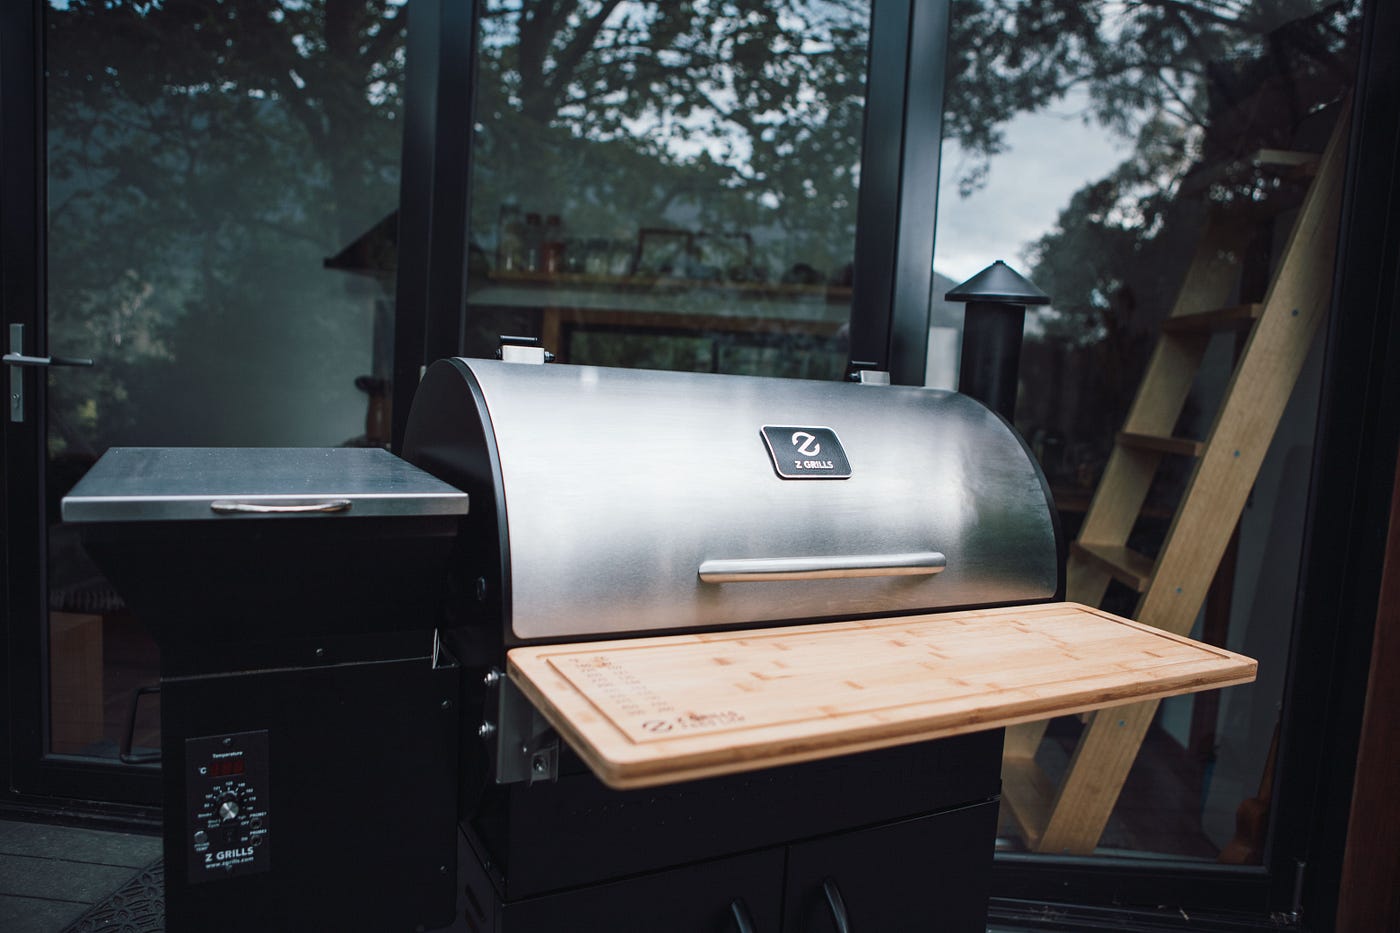 Can You Use Water Pan In Traeger Smoker, by Homesscapes